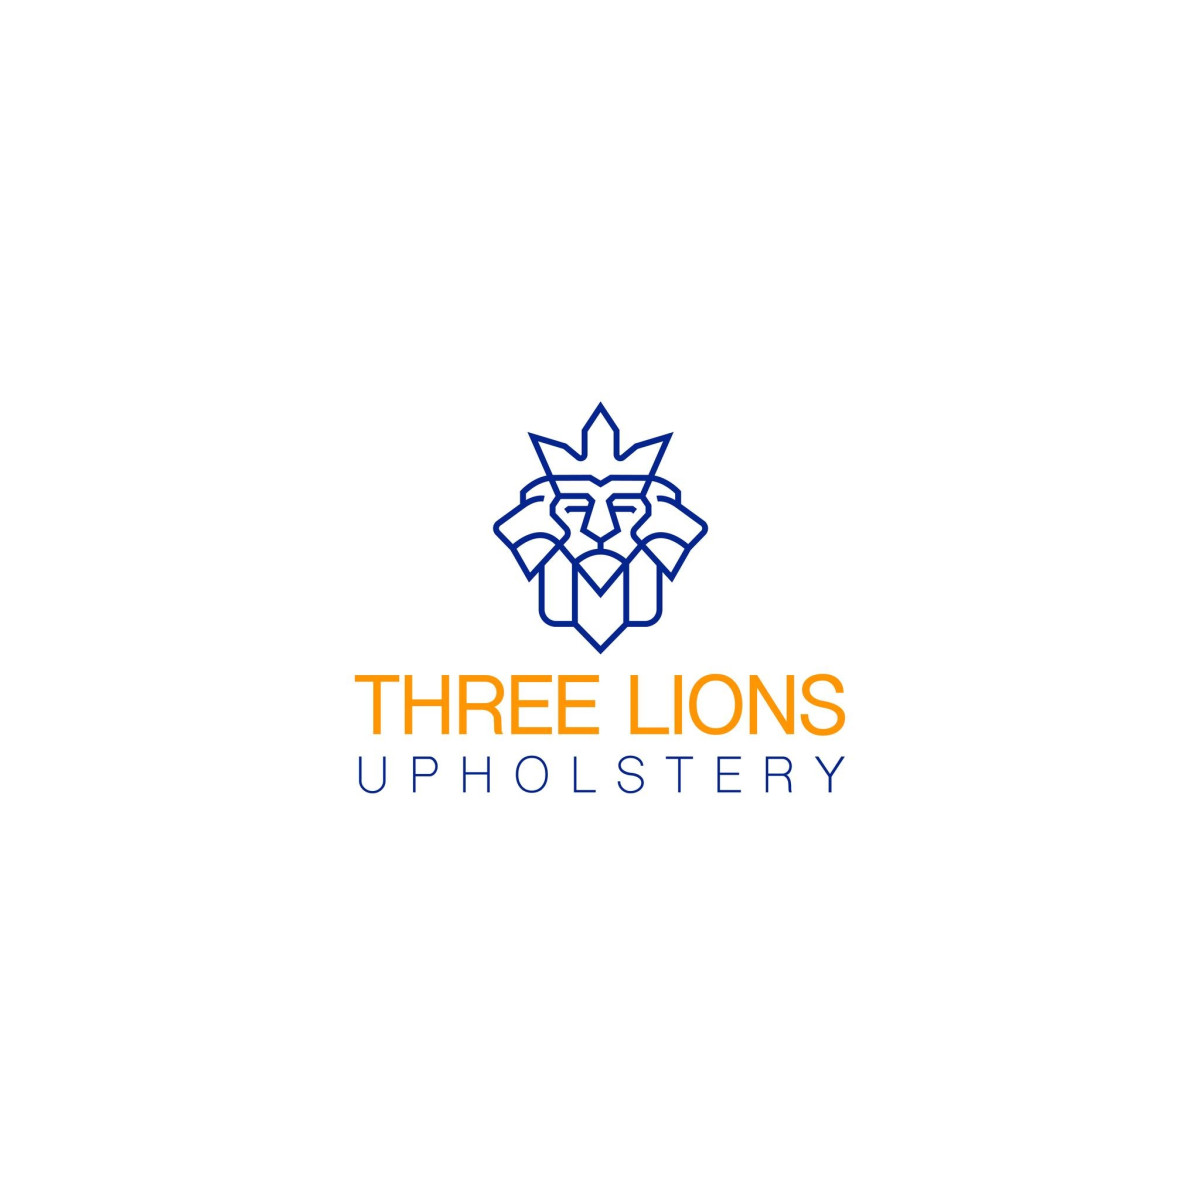 Three Lions Upholstery